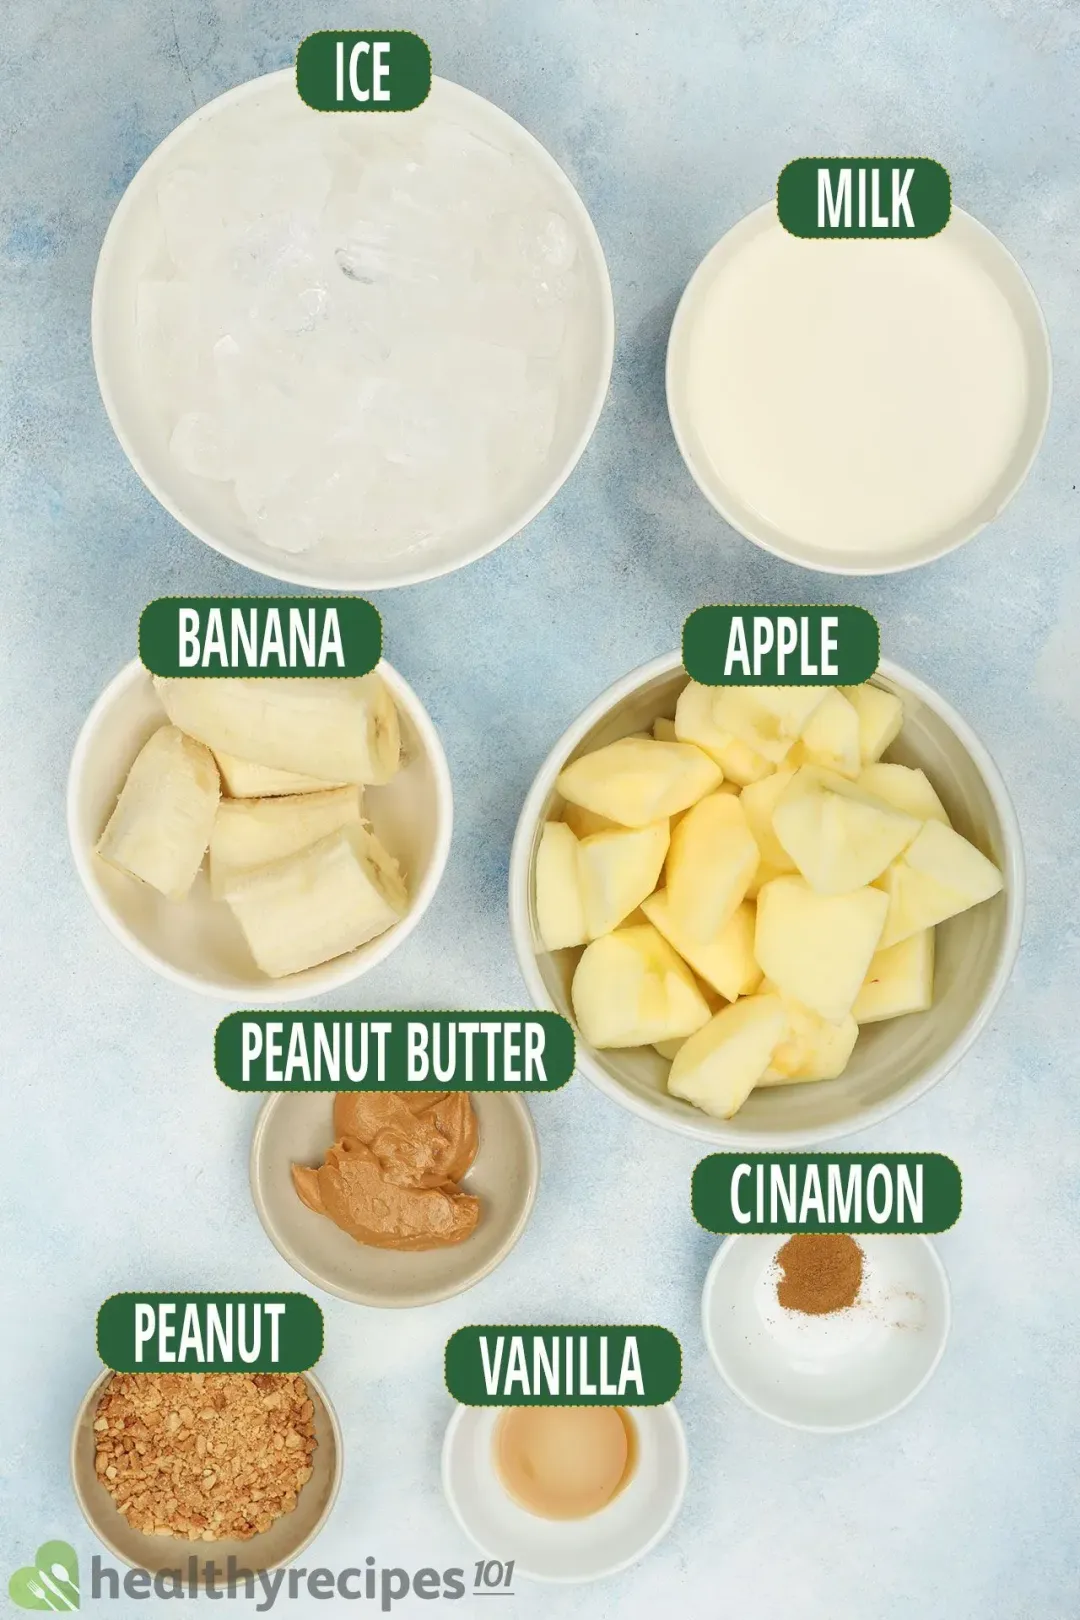 Ingredients for This Apple Peanut Butter Smoothie